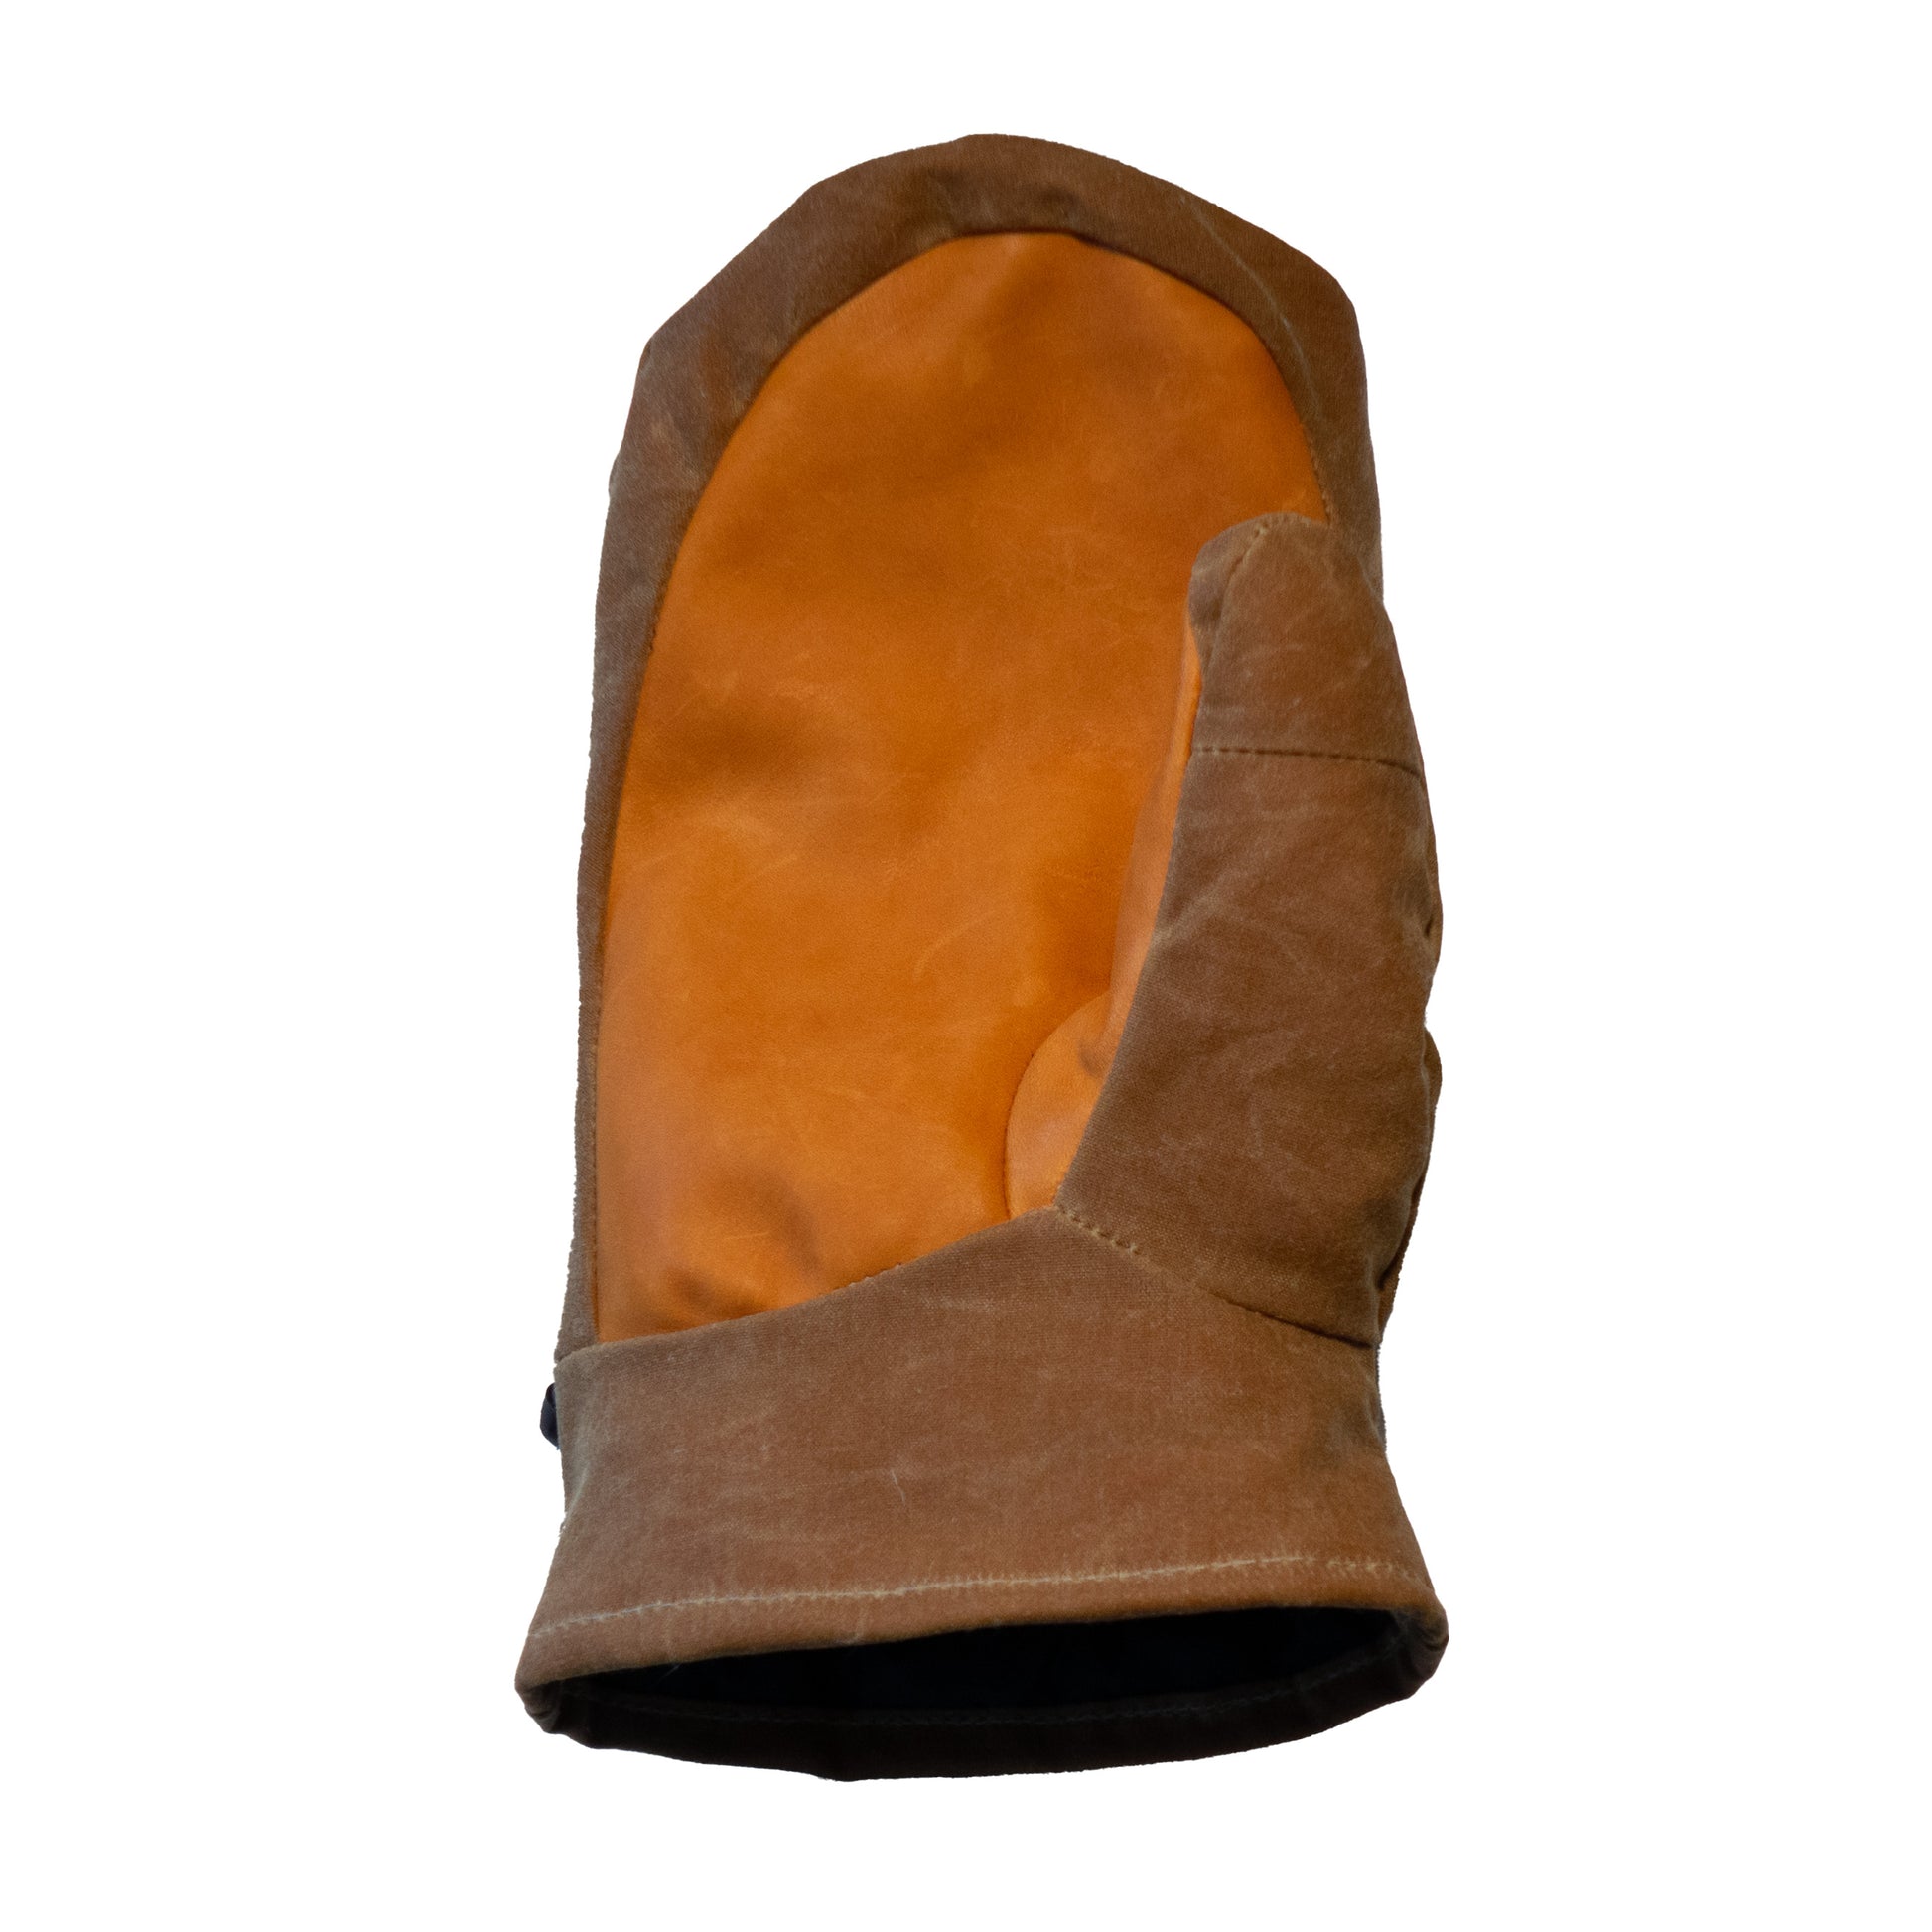 A brown leather Mainers Peaks Mitt on a white background.